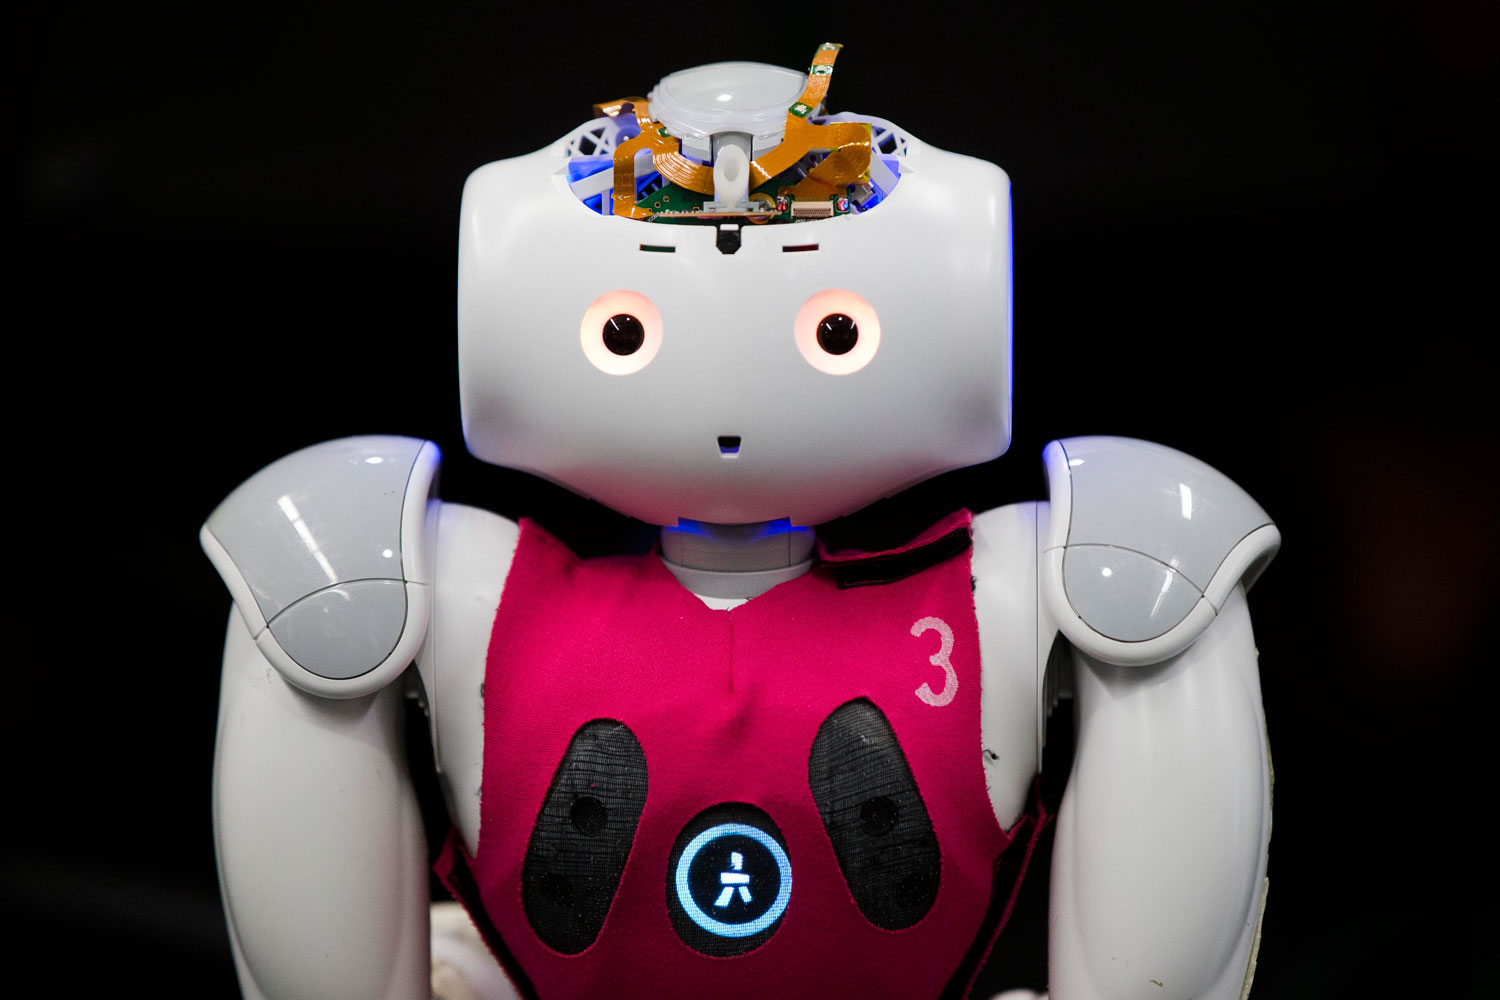 Students at the University of Pennsylvania work with one of their RoboCup entries known as Nao in Philadelphia on July 7, 2014.